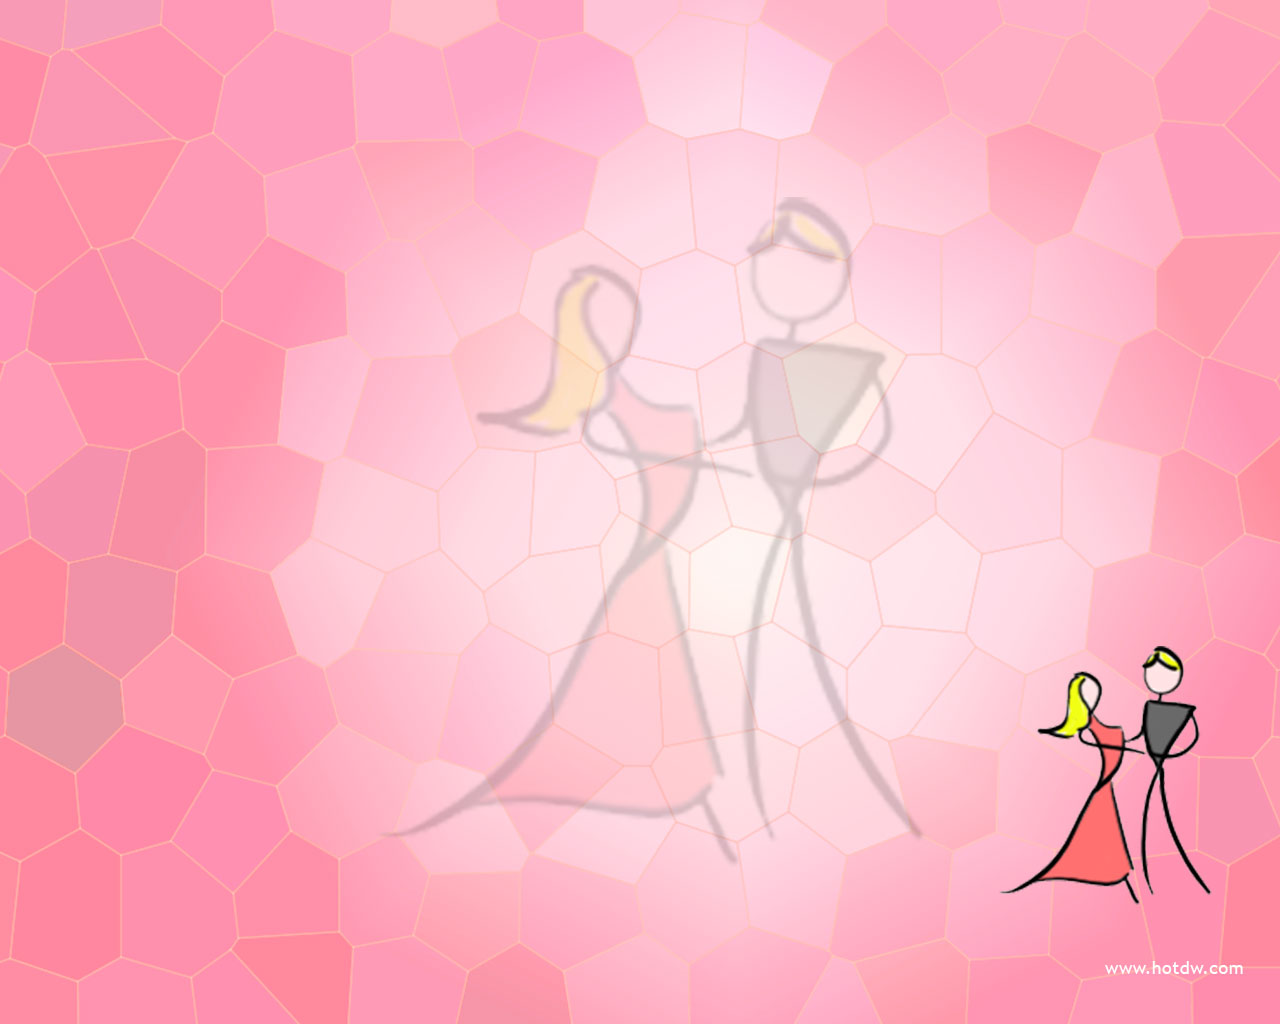  Wedding PowerPoint Background Pictures and Wedding Templates to 1280x1024